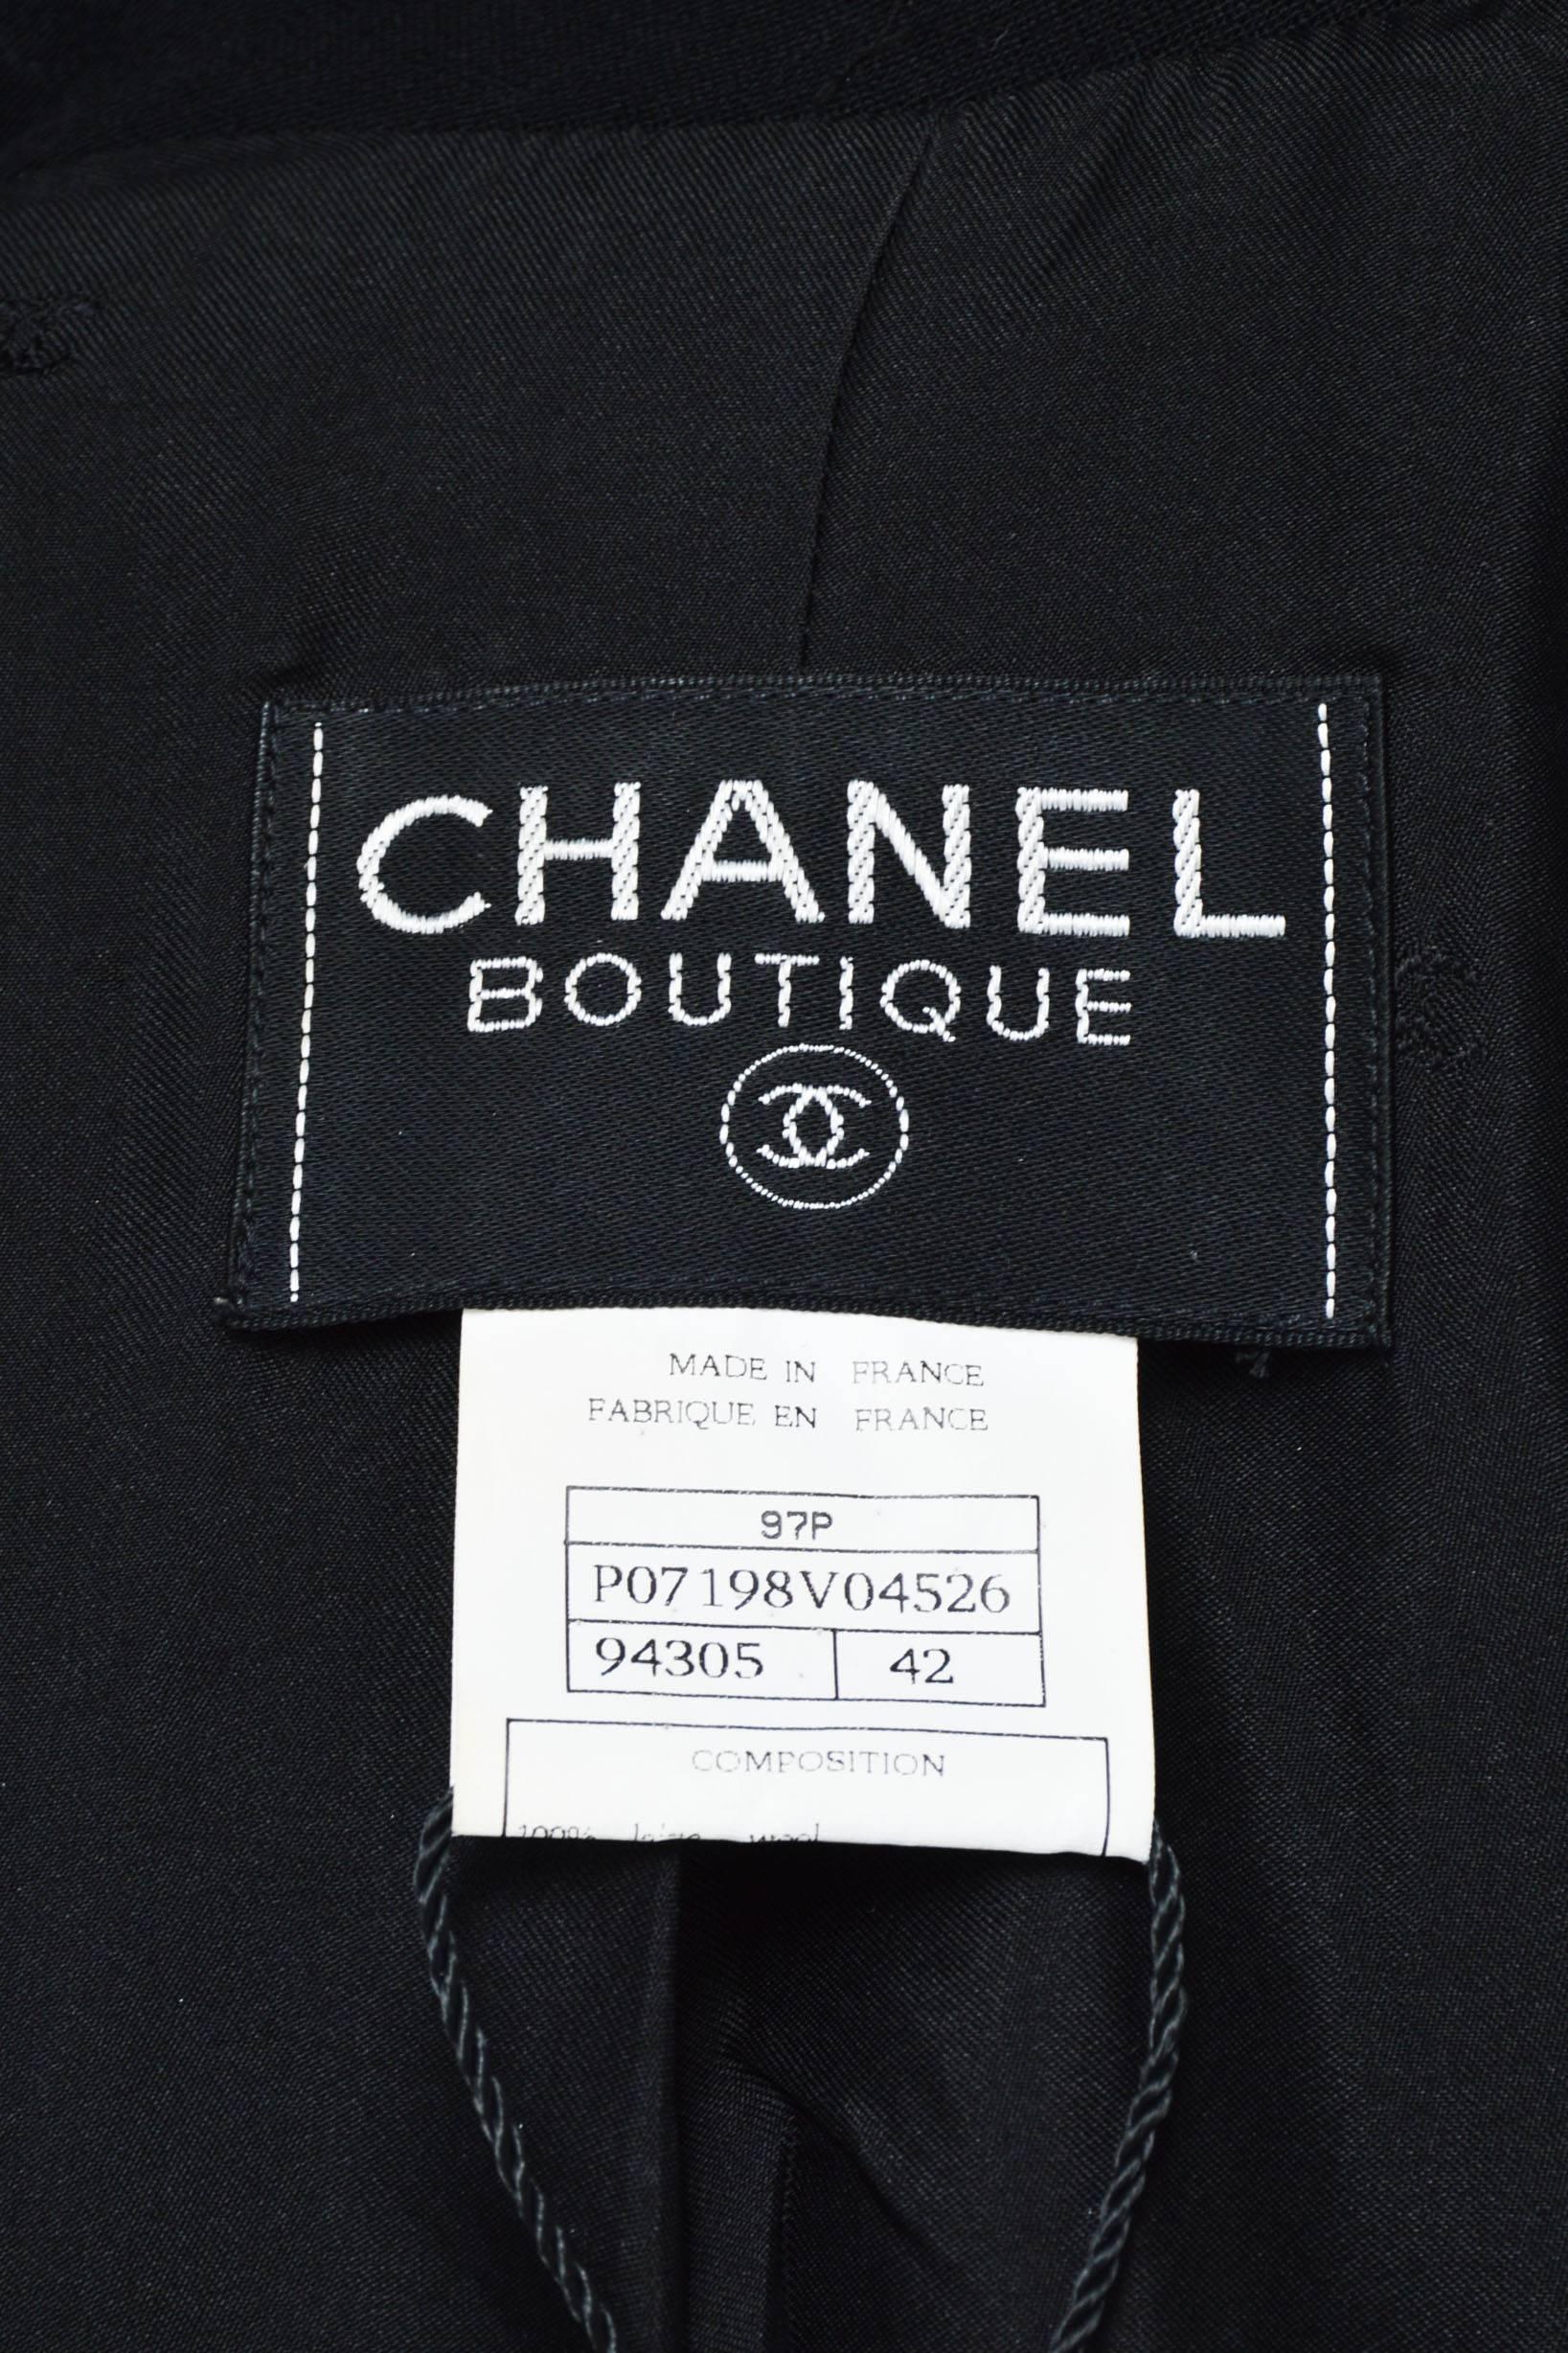 Chanel Boutique 1997 Spring Collection Black Wool LS Blazer Jacket Size 42 For Sale 1